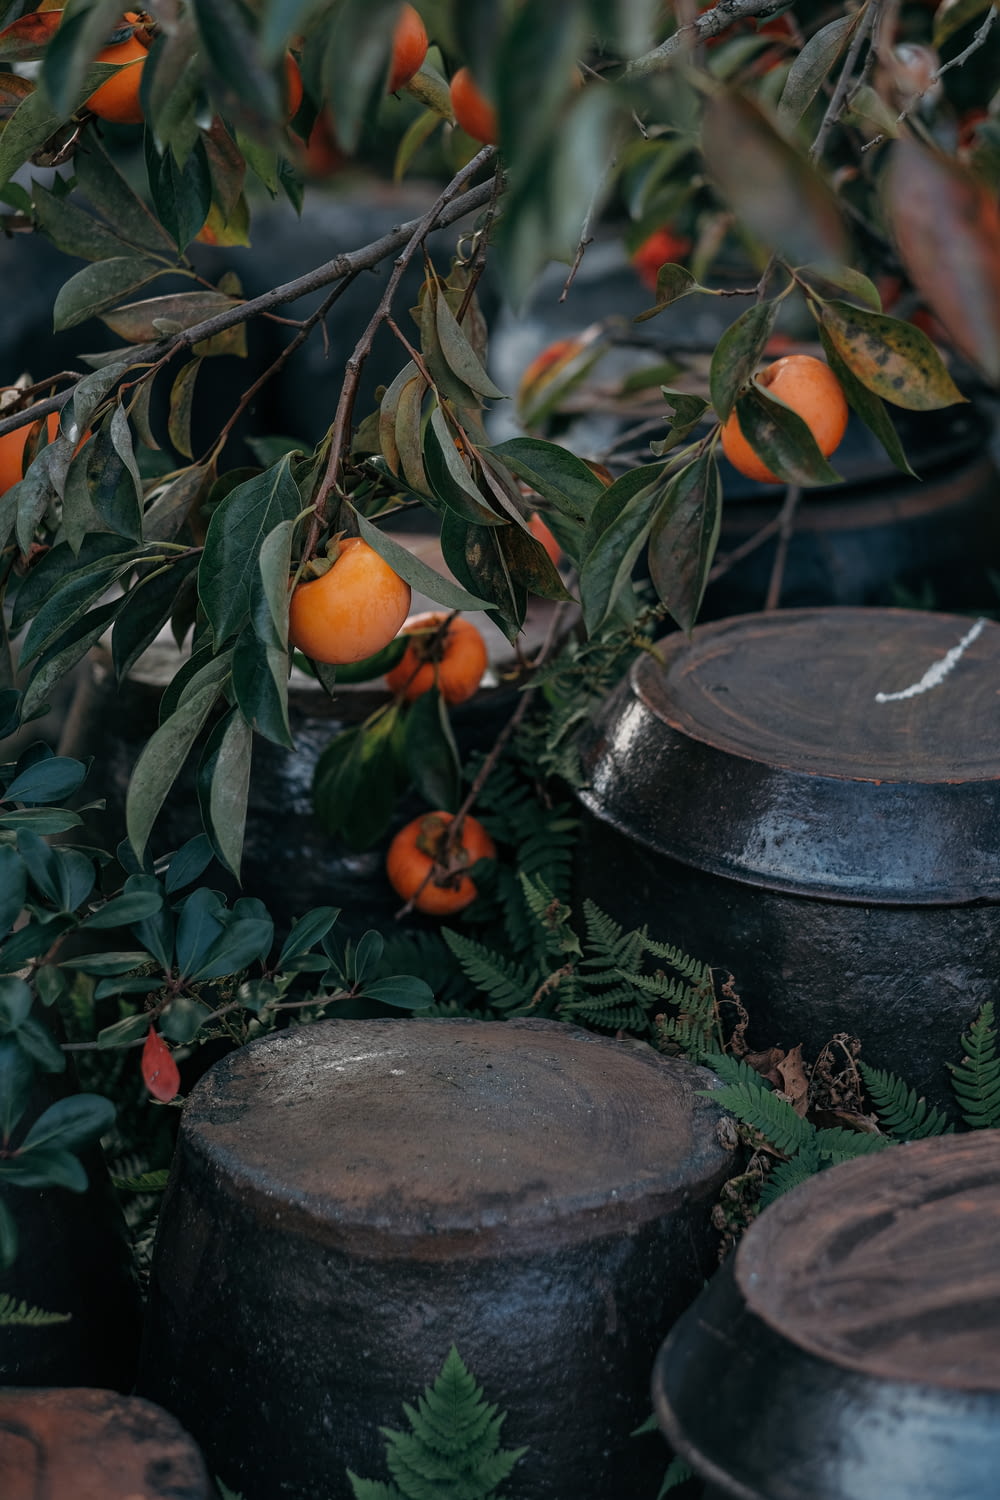 a group of pots sitting next to a tree filled with oranges